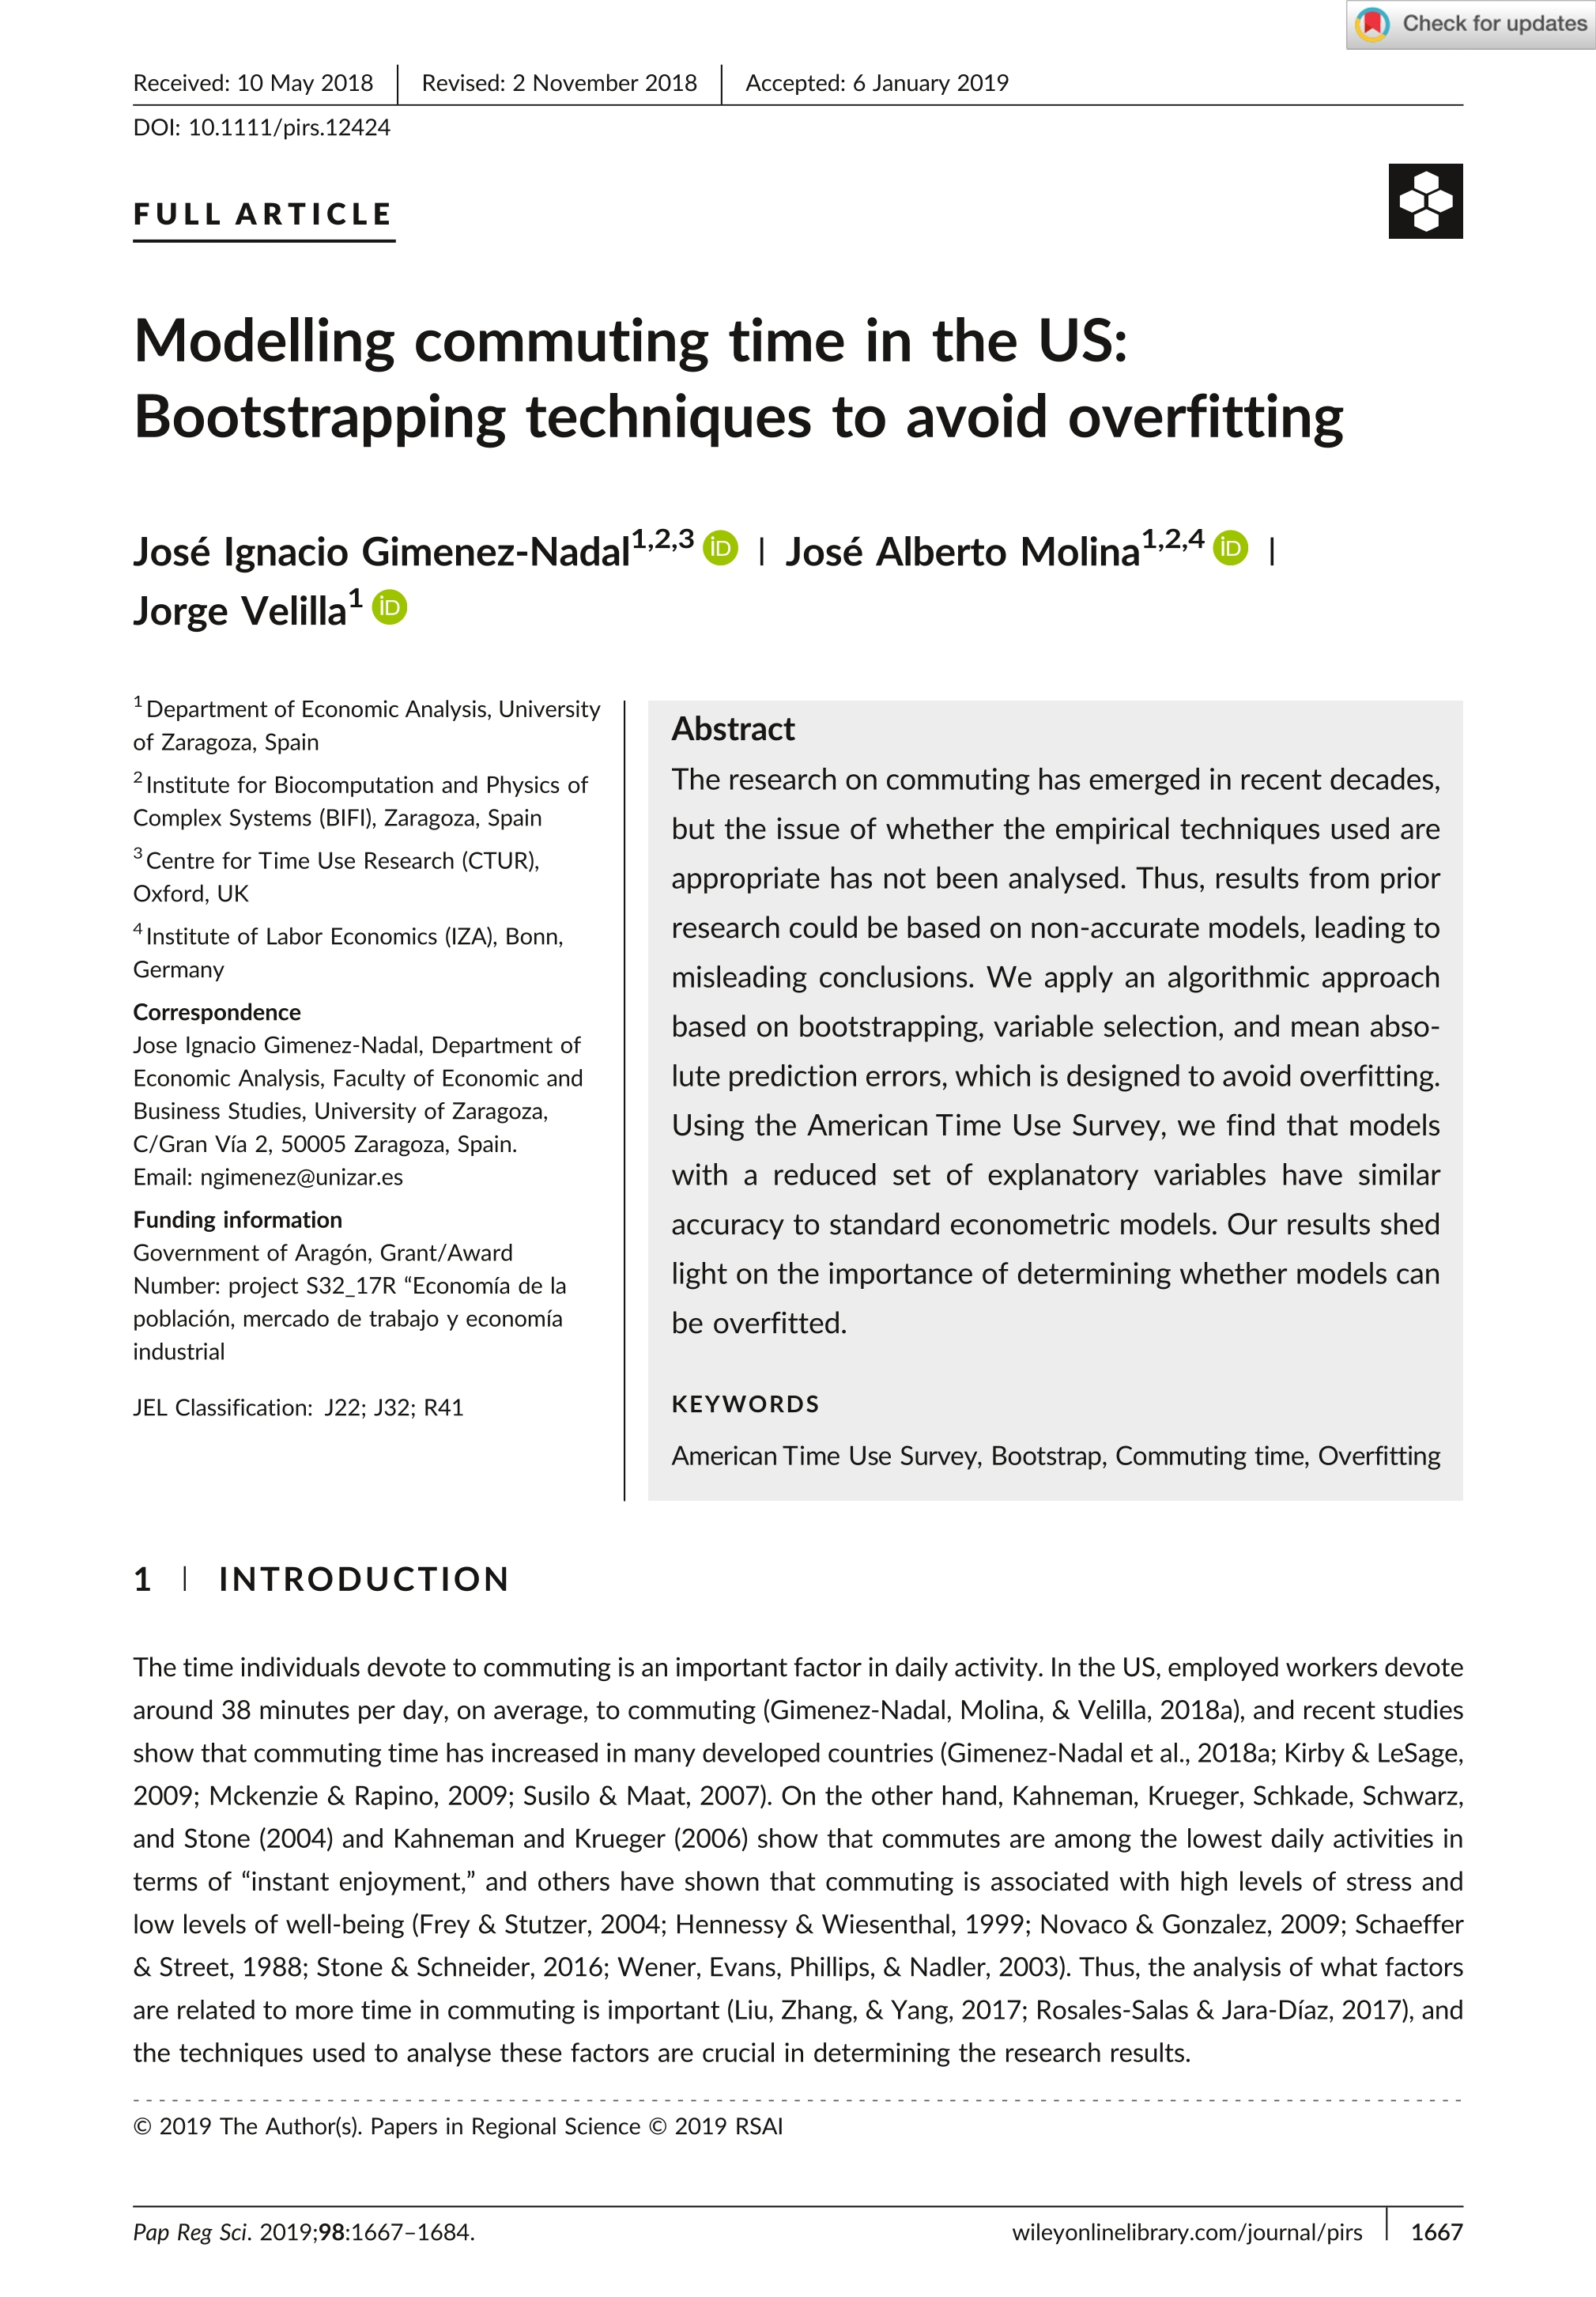 Modelling commuting time in the US: Bootstrapping techniques to avoid overfitting